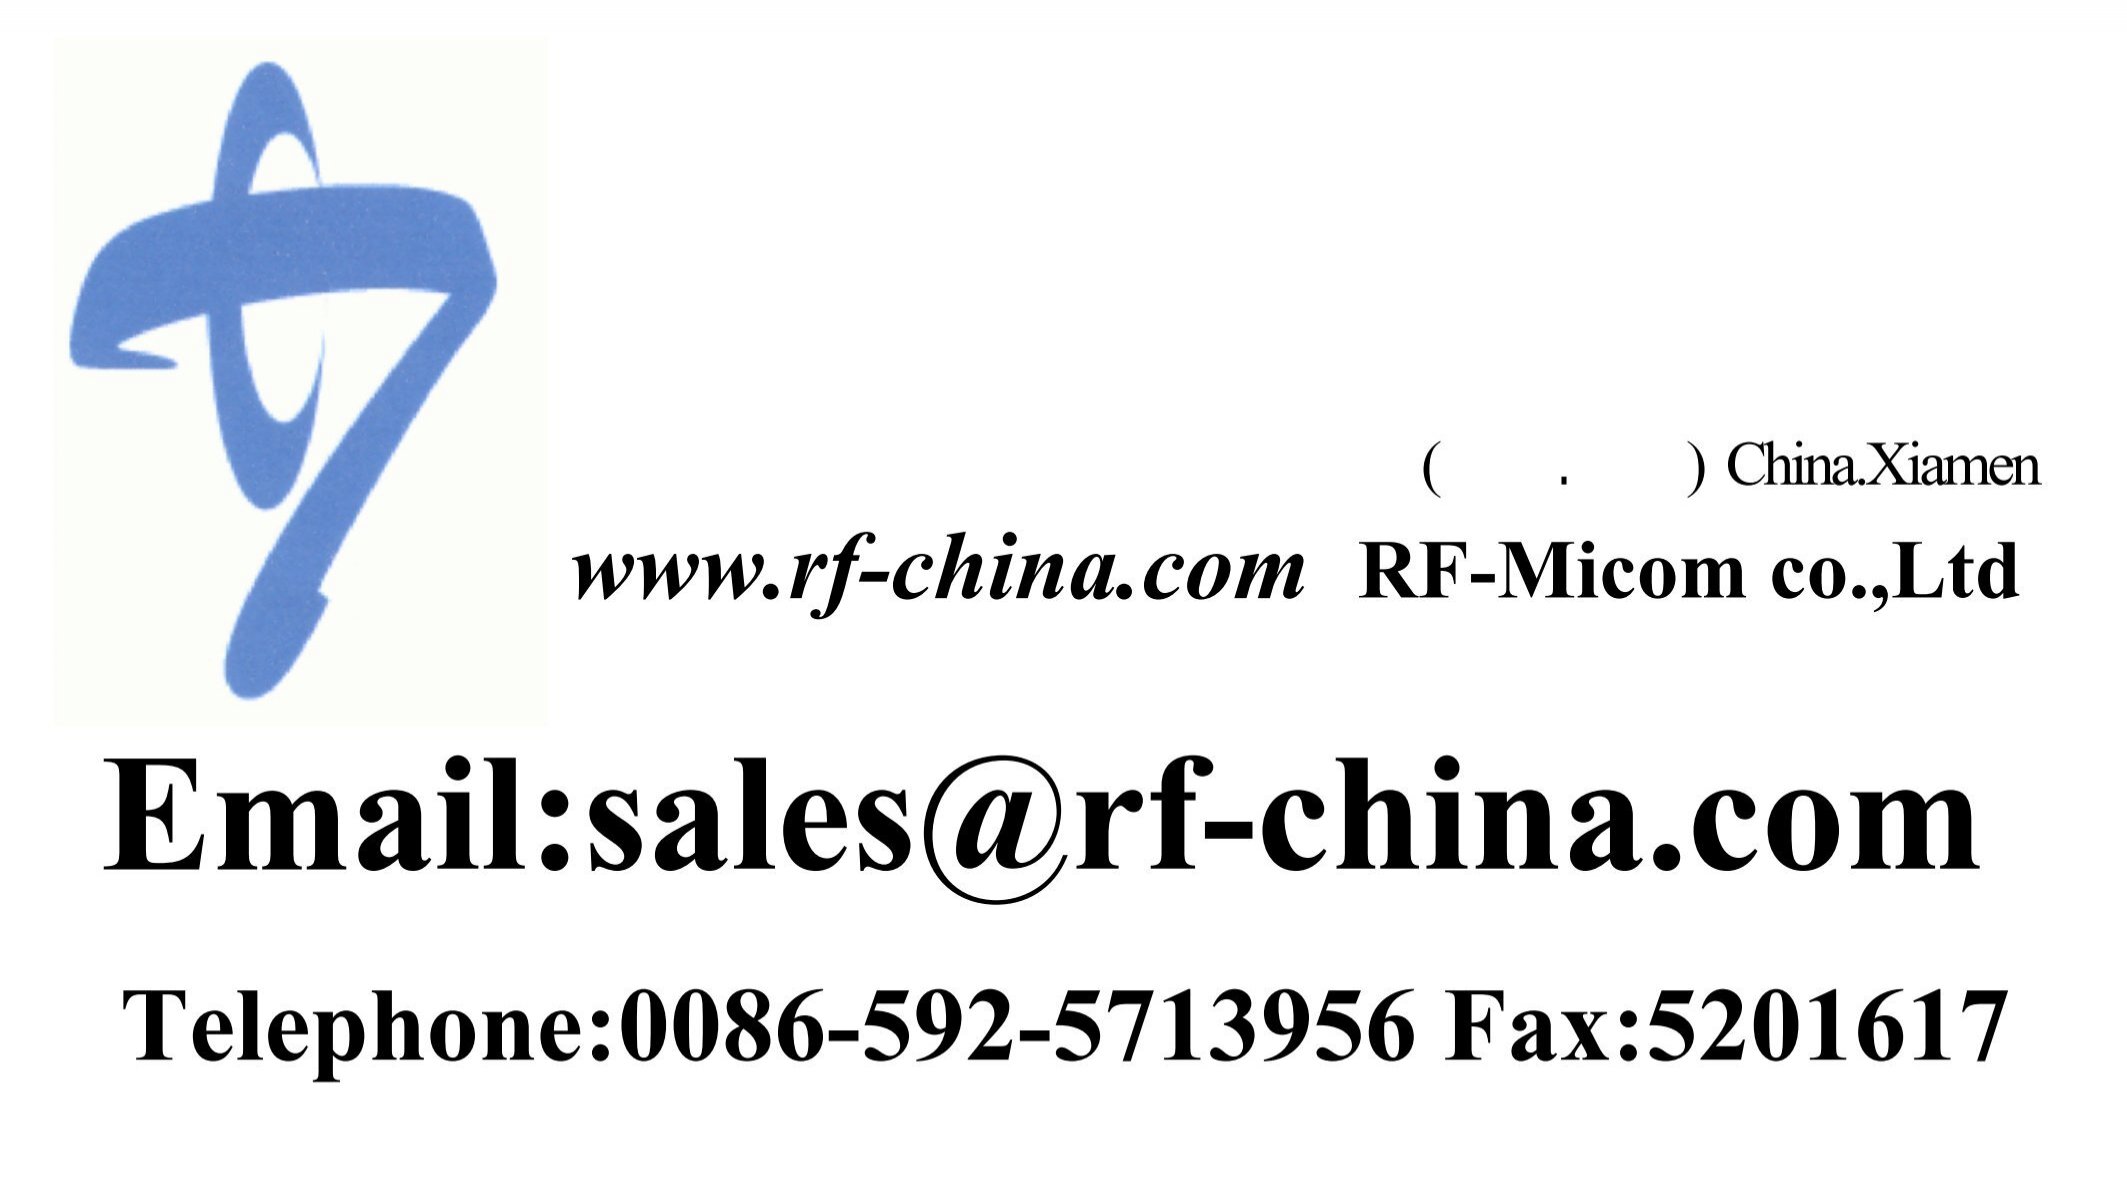 Emailsales@rf-china